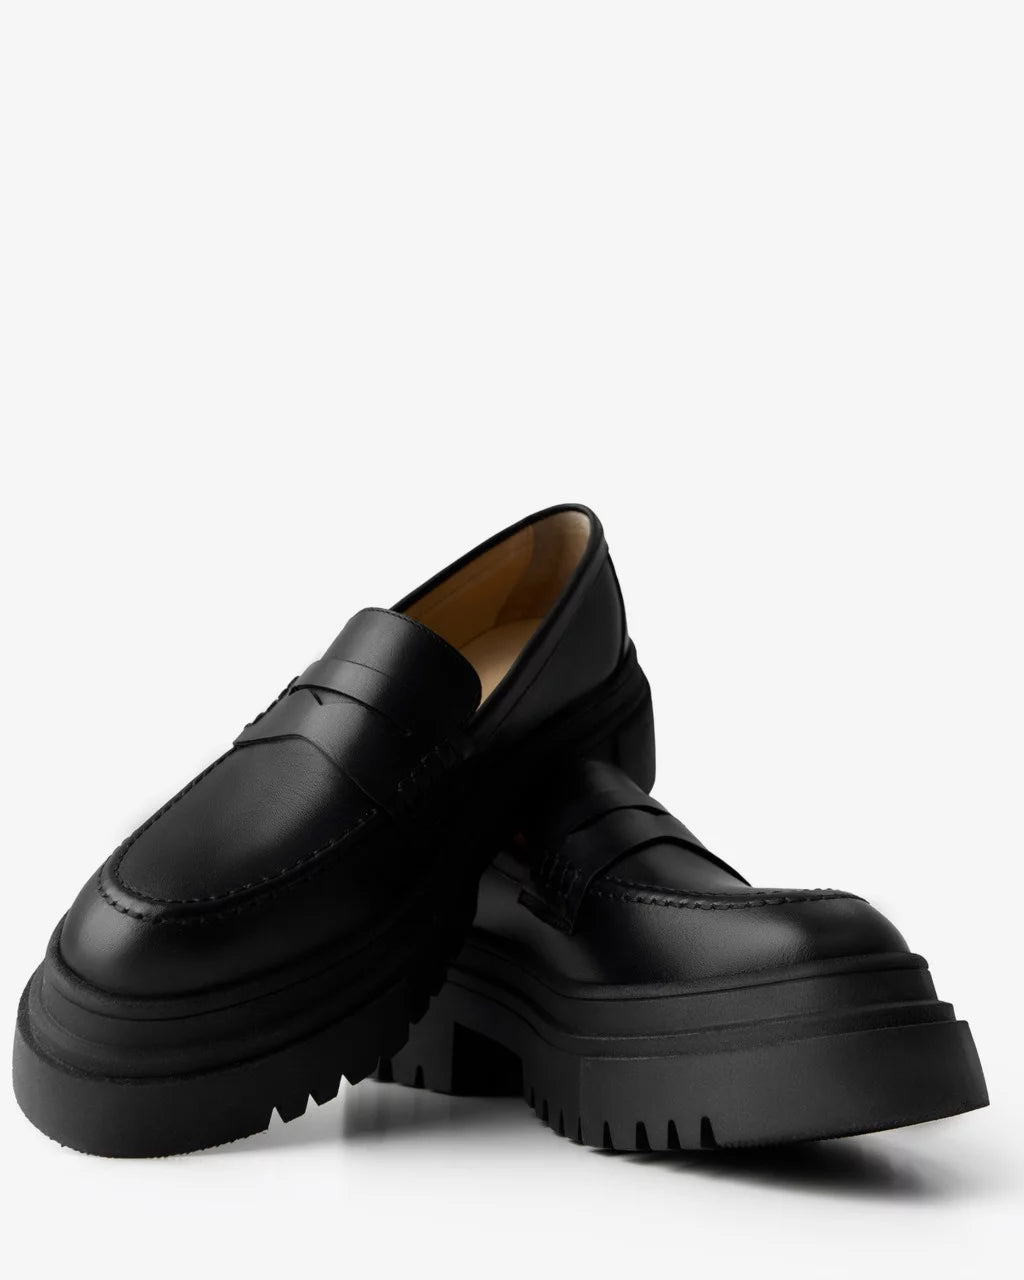 Basic black loafers with thick soles